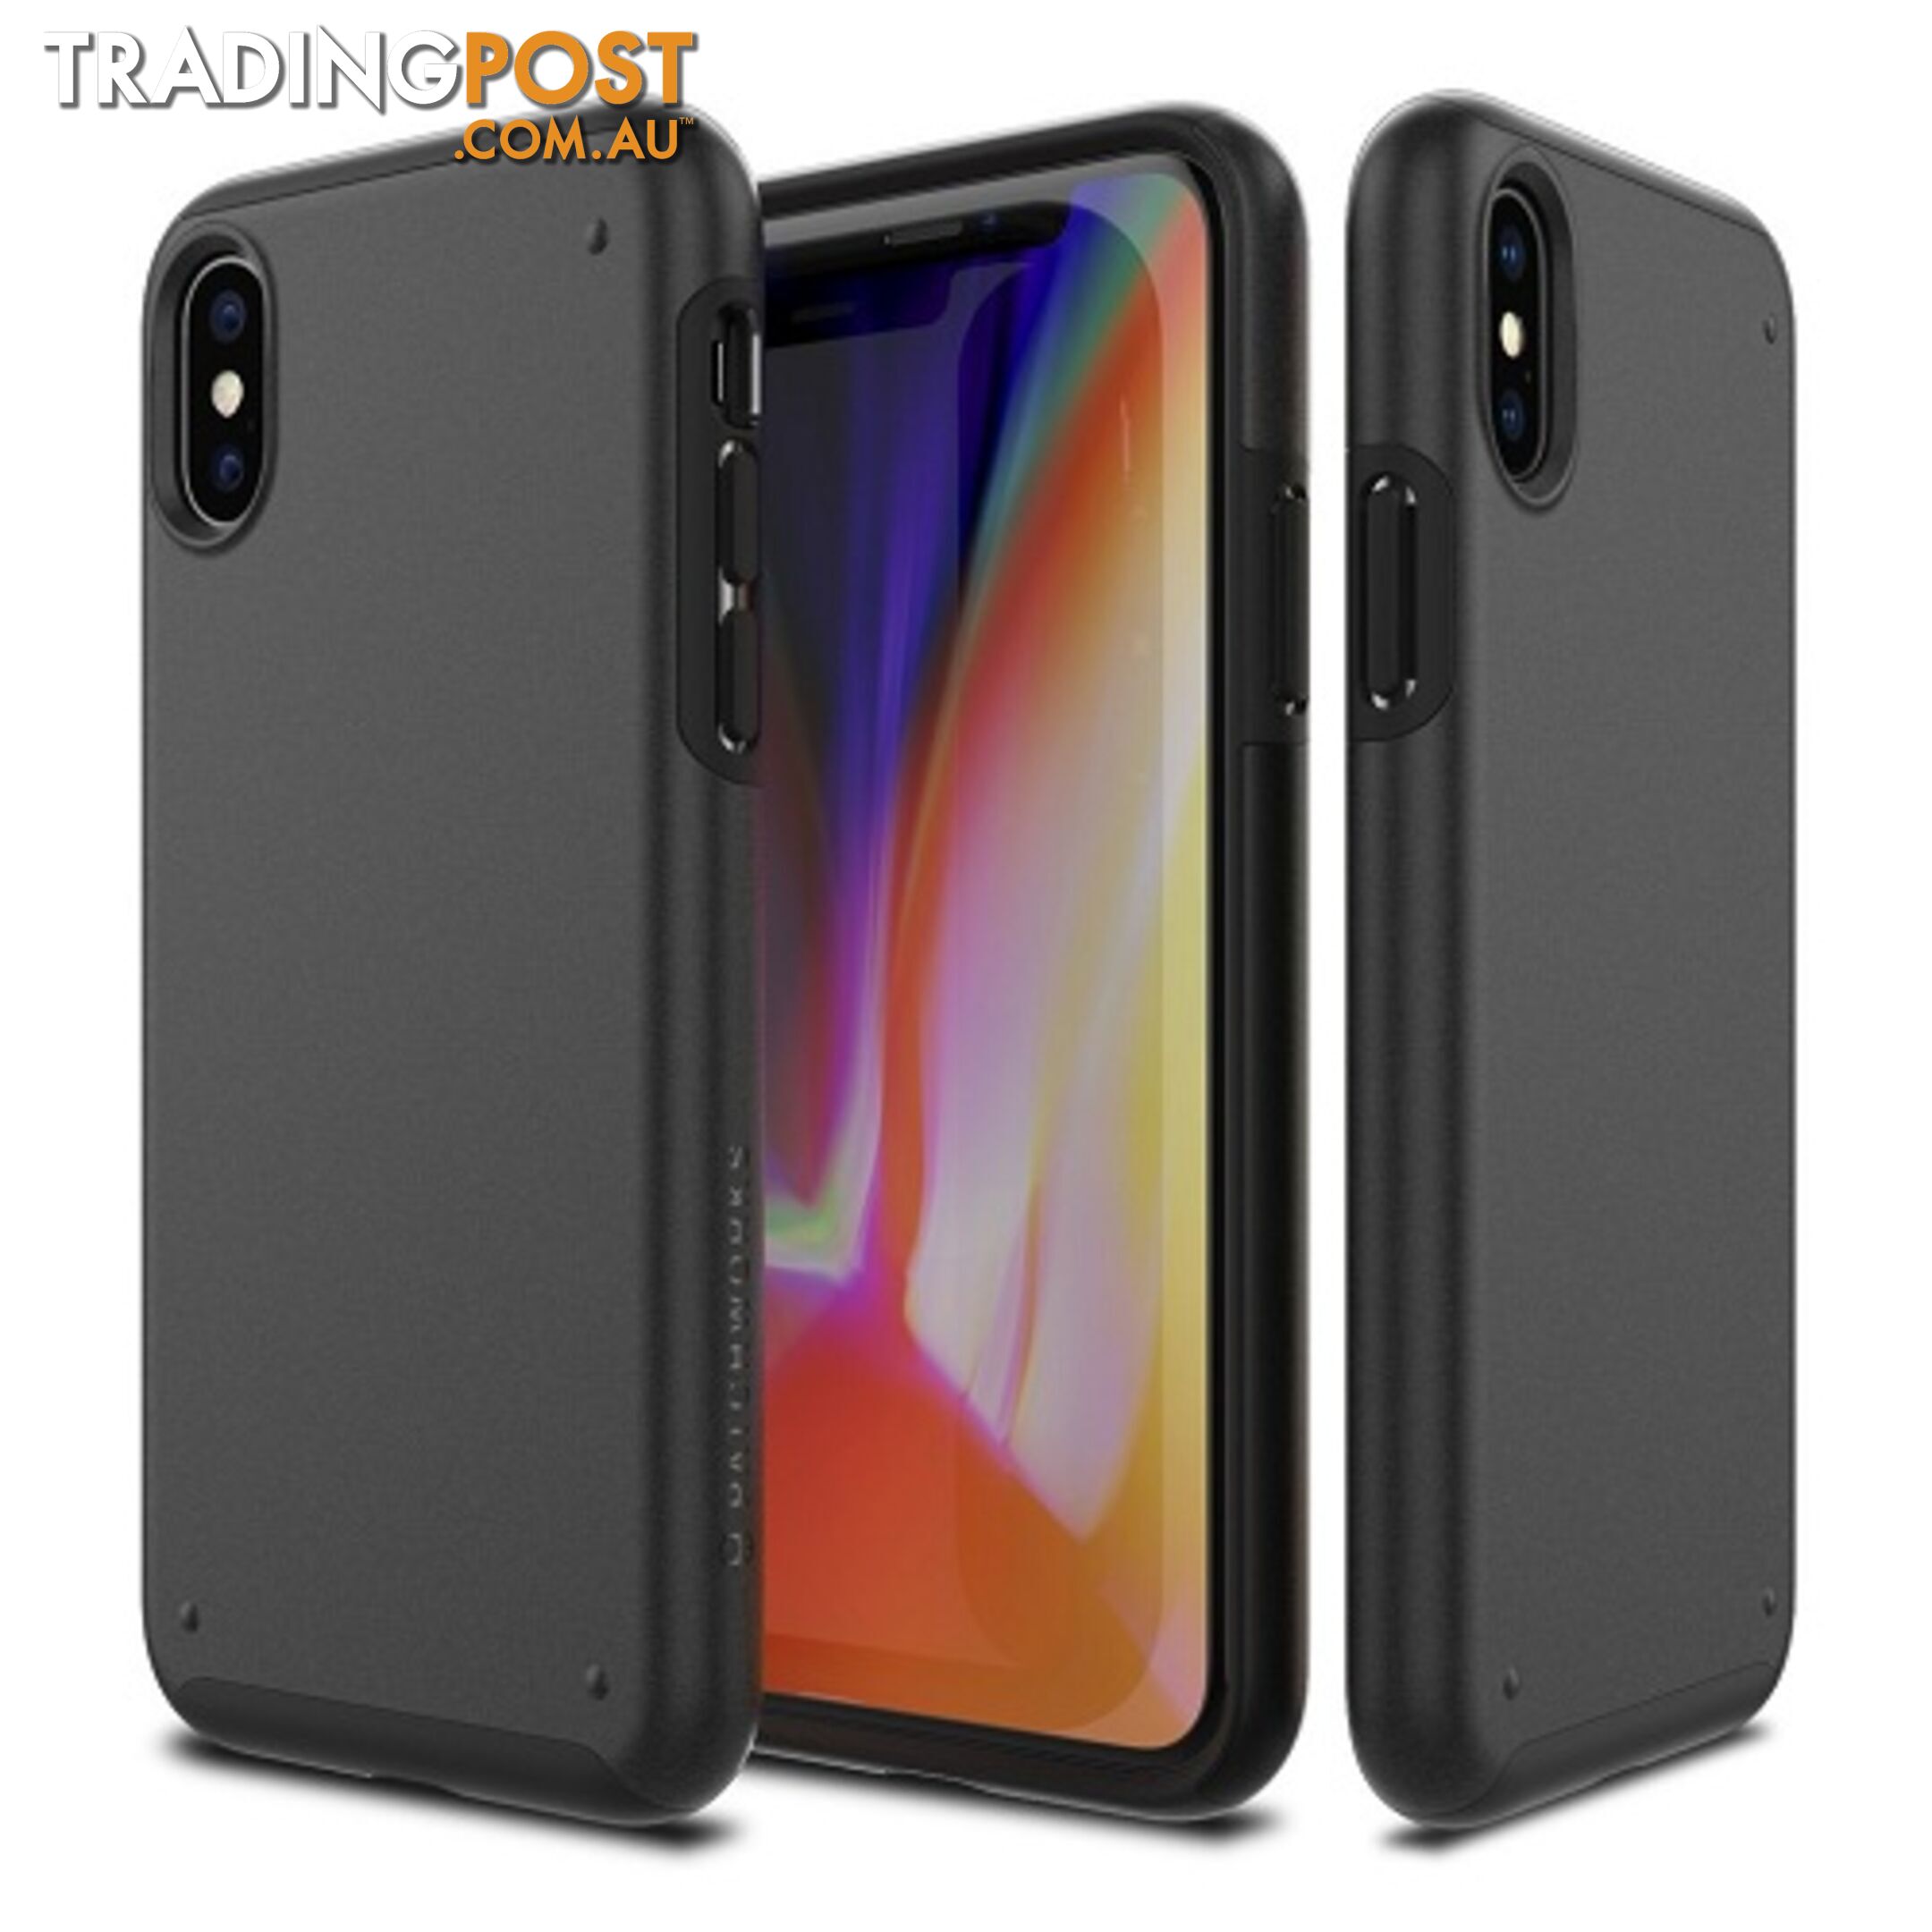 Patchworks Chroma Metalic Rugged Case for iPhone X - Black / Black - 8809453318449/CRA81 - Patchworks